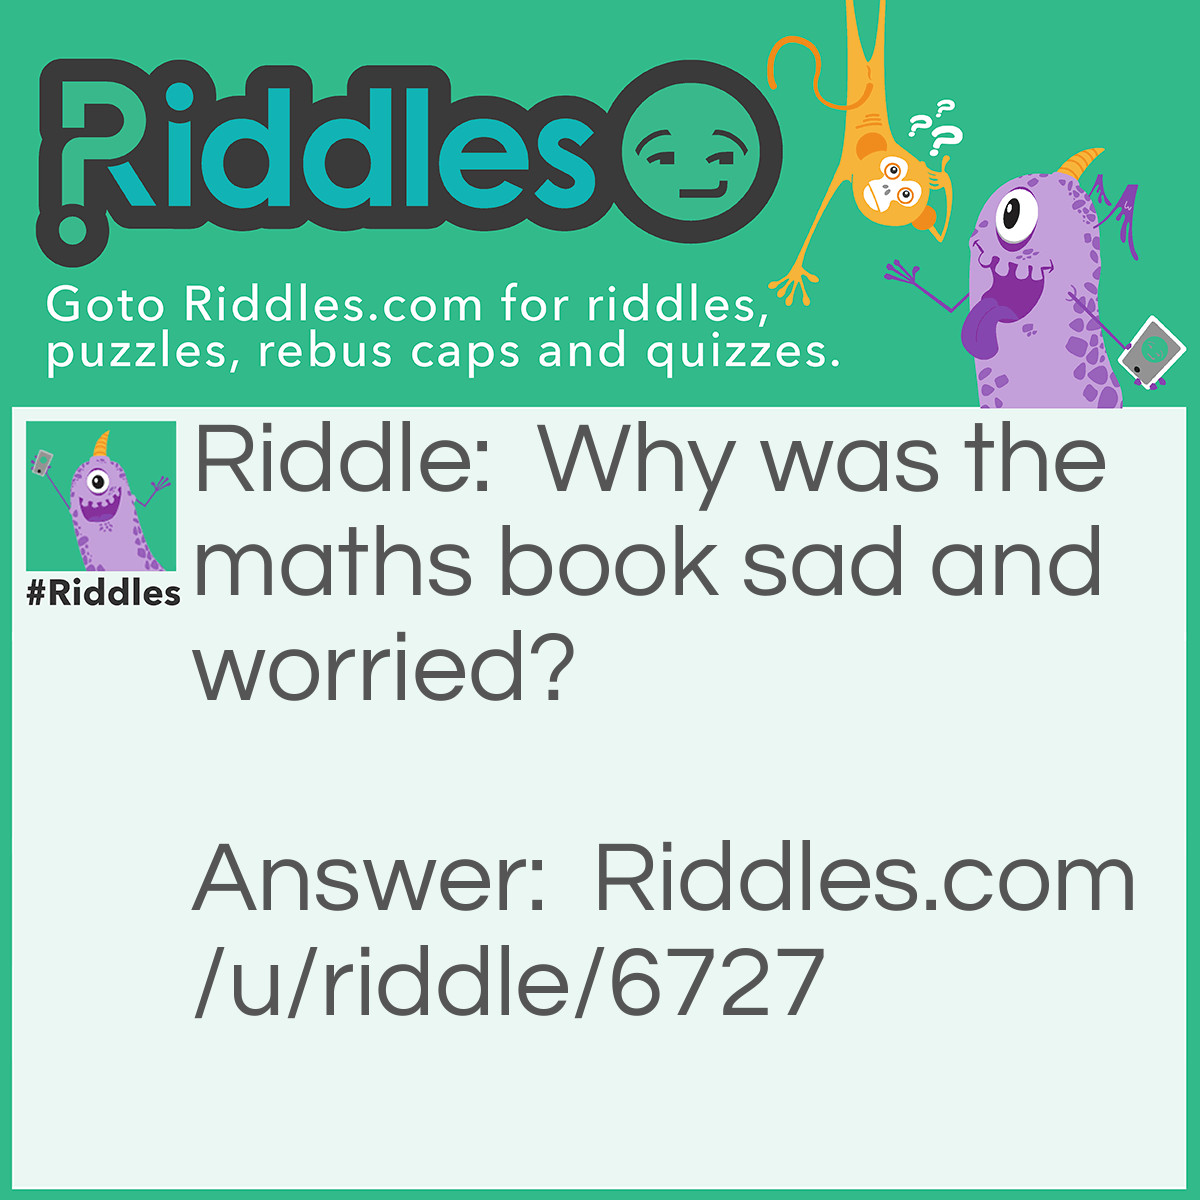 Riddle: Why was the maths book sad and worried? Answer: Because it had too many problems!